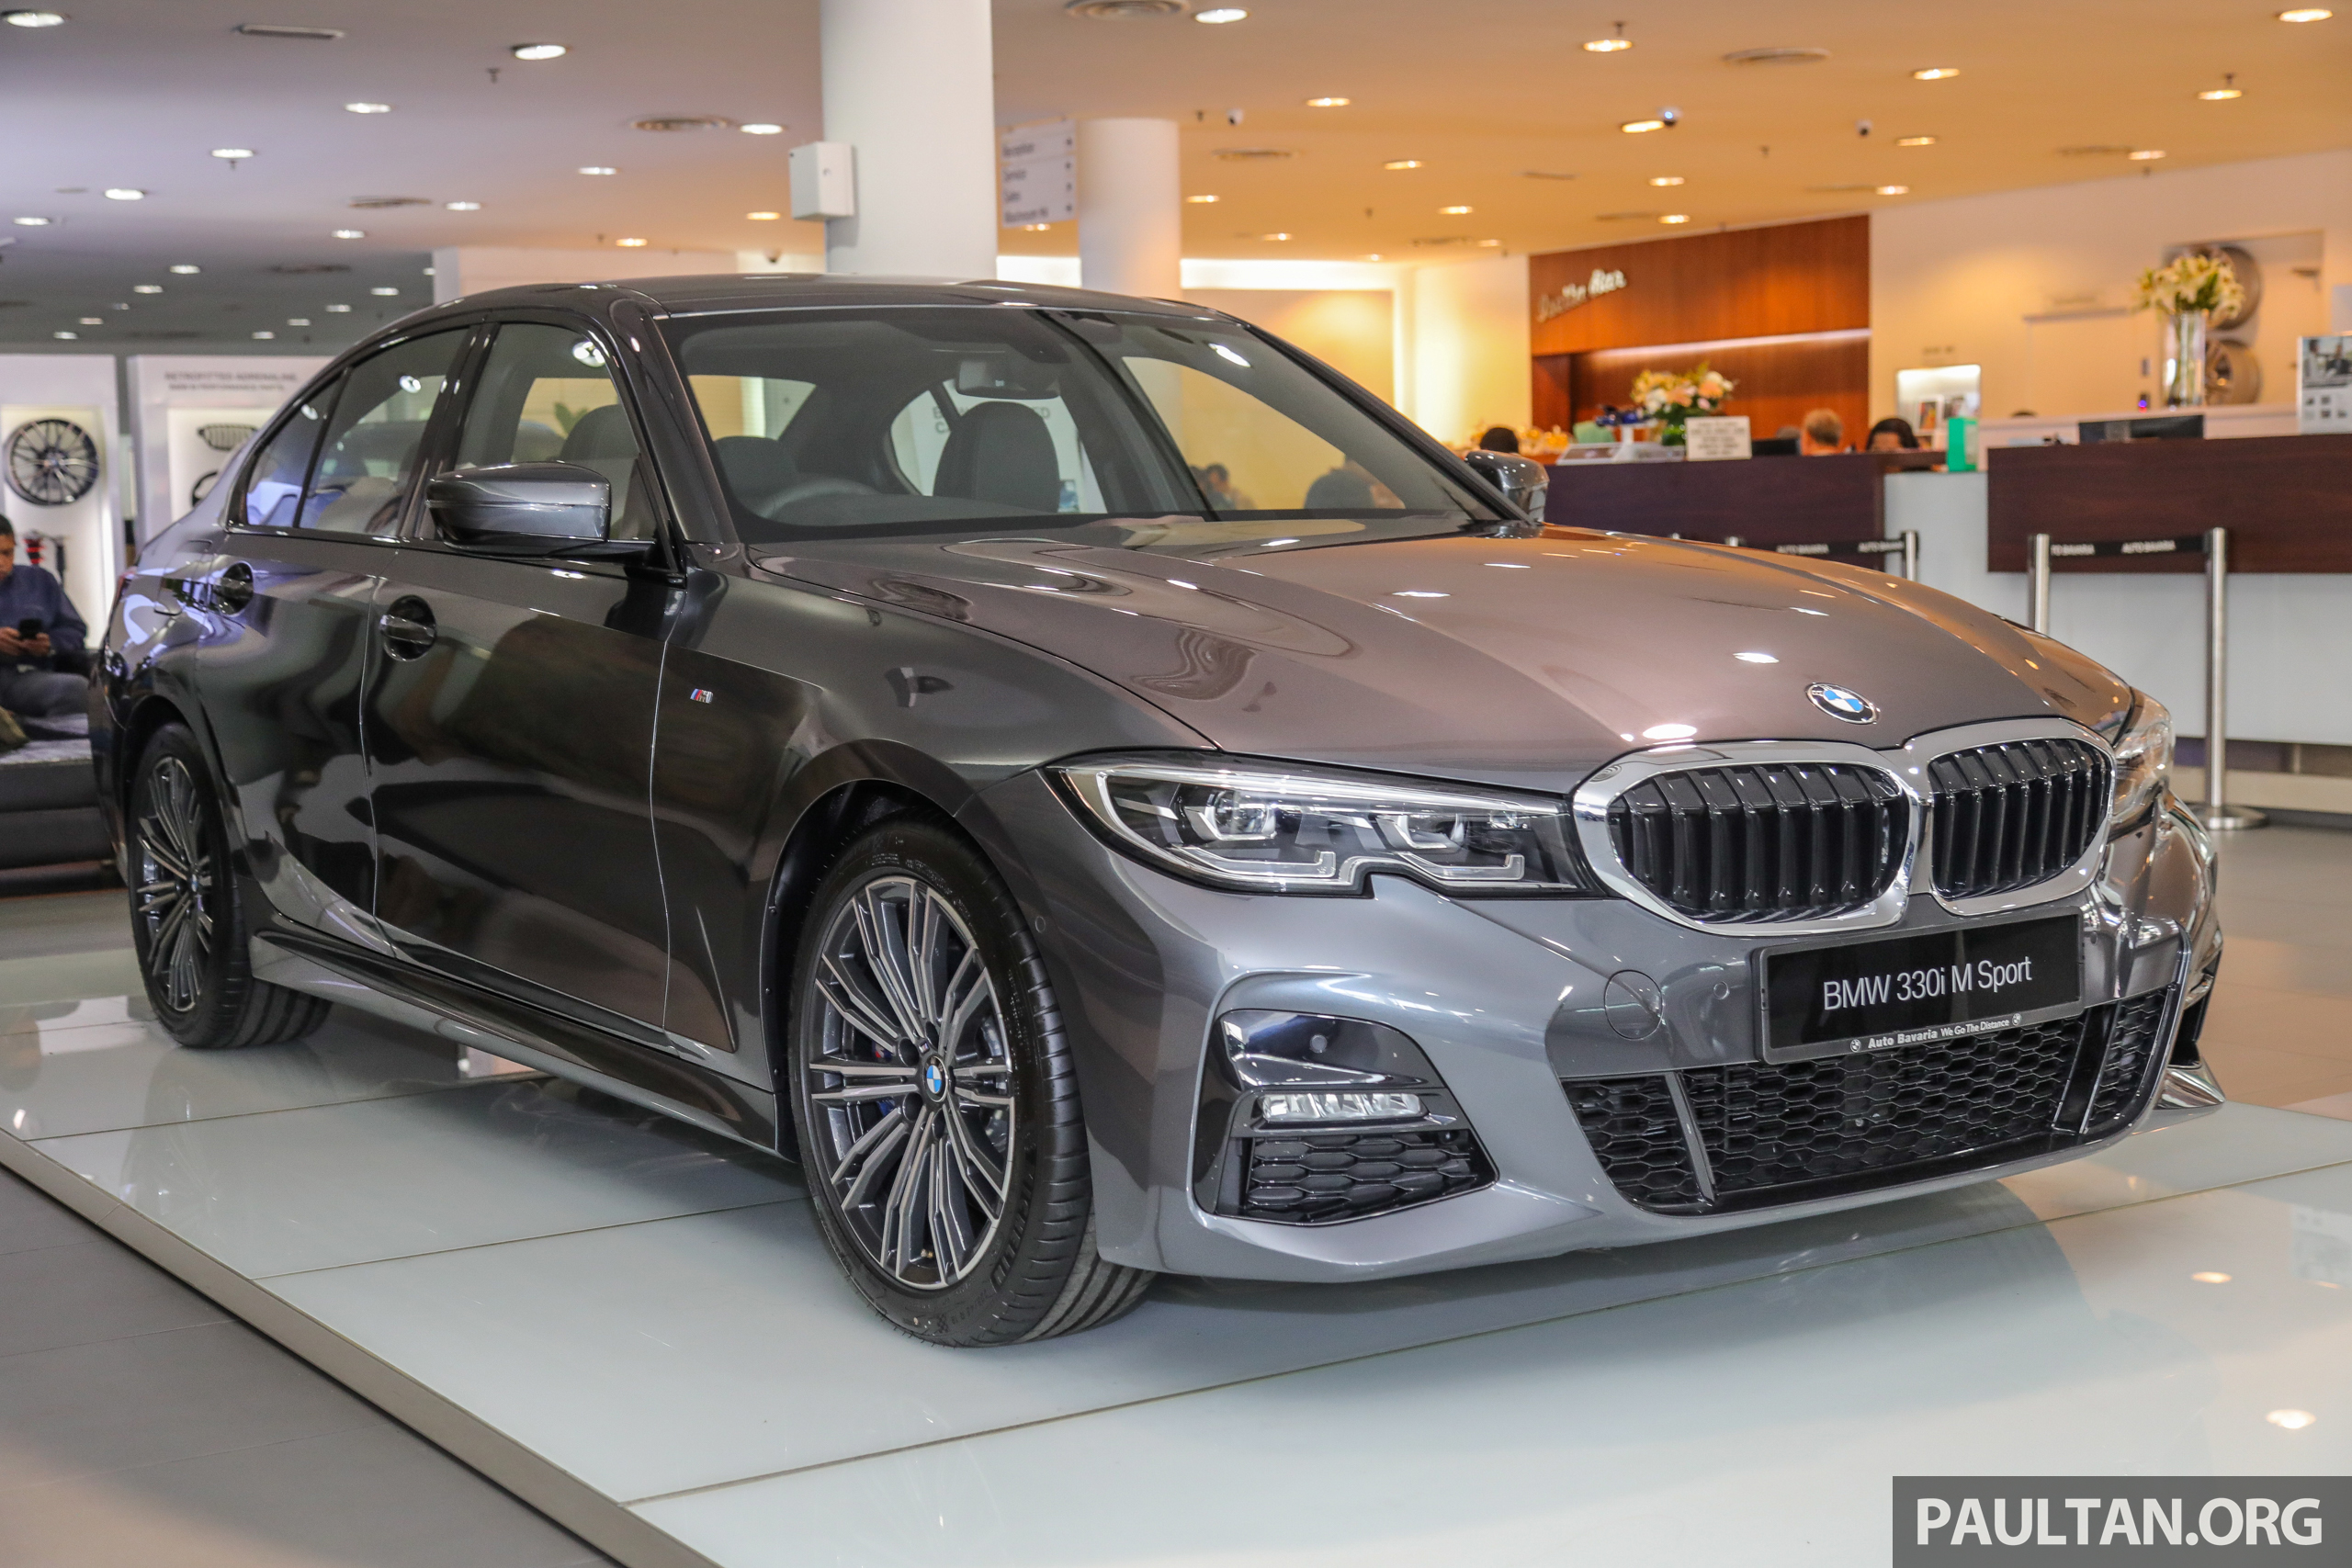 G20 Bmw 330I M Sport And 320I Sport Prices Increased To Rm294K And Rm249K -  330I Now Comes With Aeb - Paultan.Org